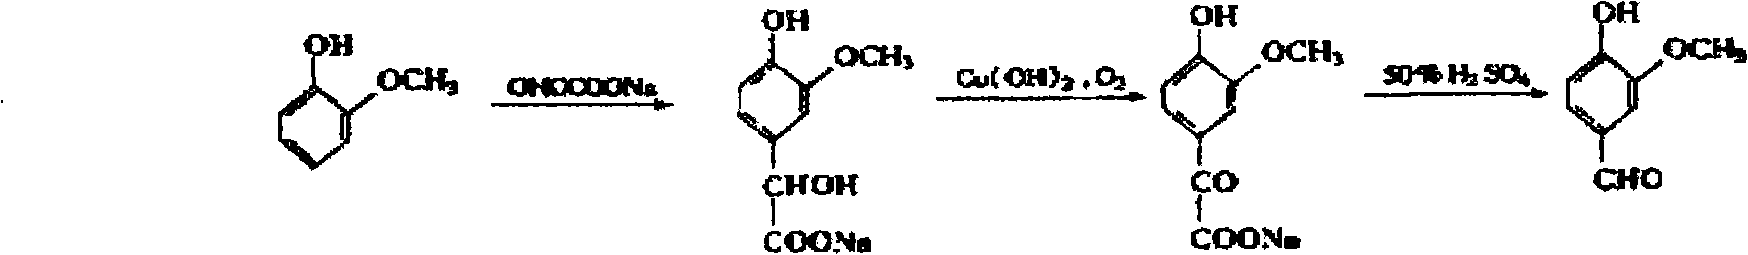 Method for synthesizing vanillin by using glyoxylic acid and guaiacol together